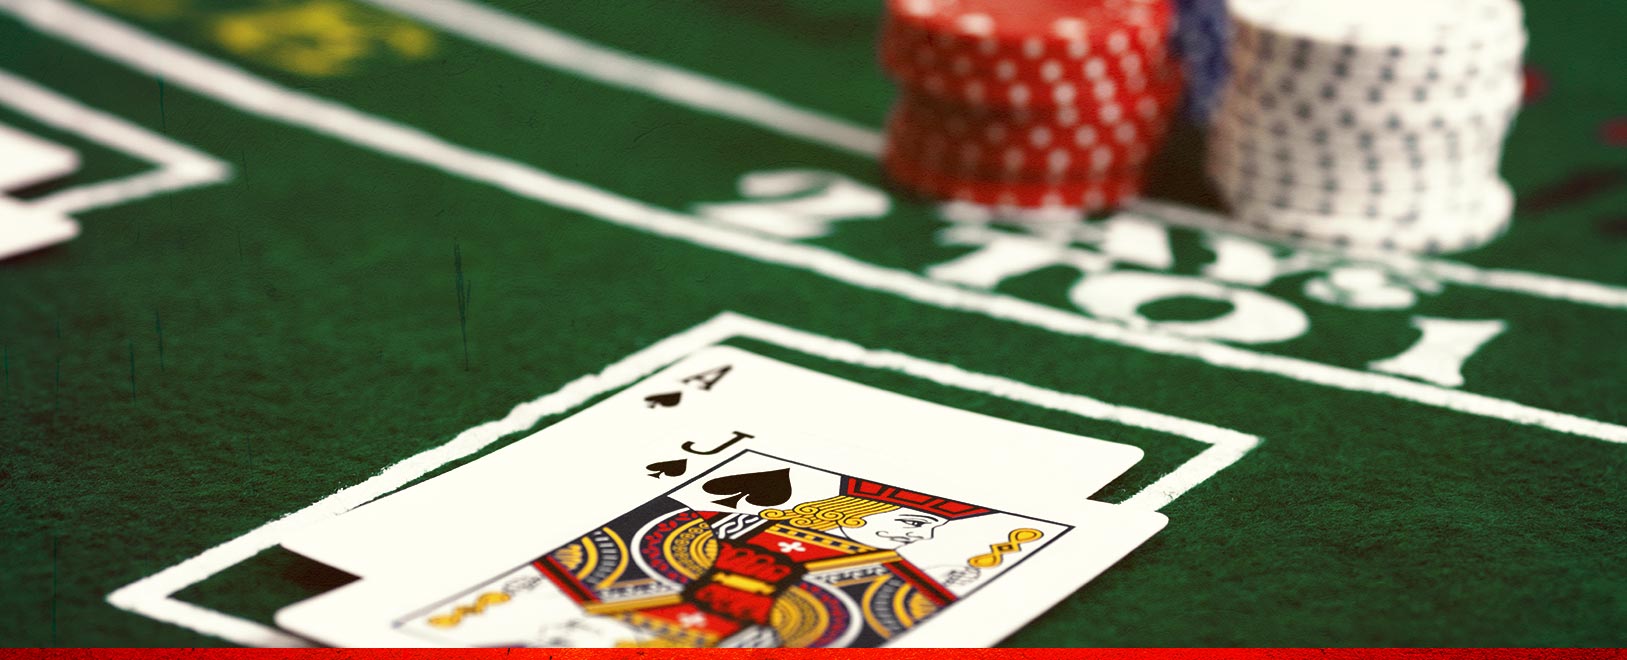 Blackjack Strategy: How to Play Against an Ace